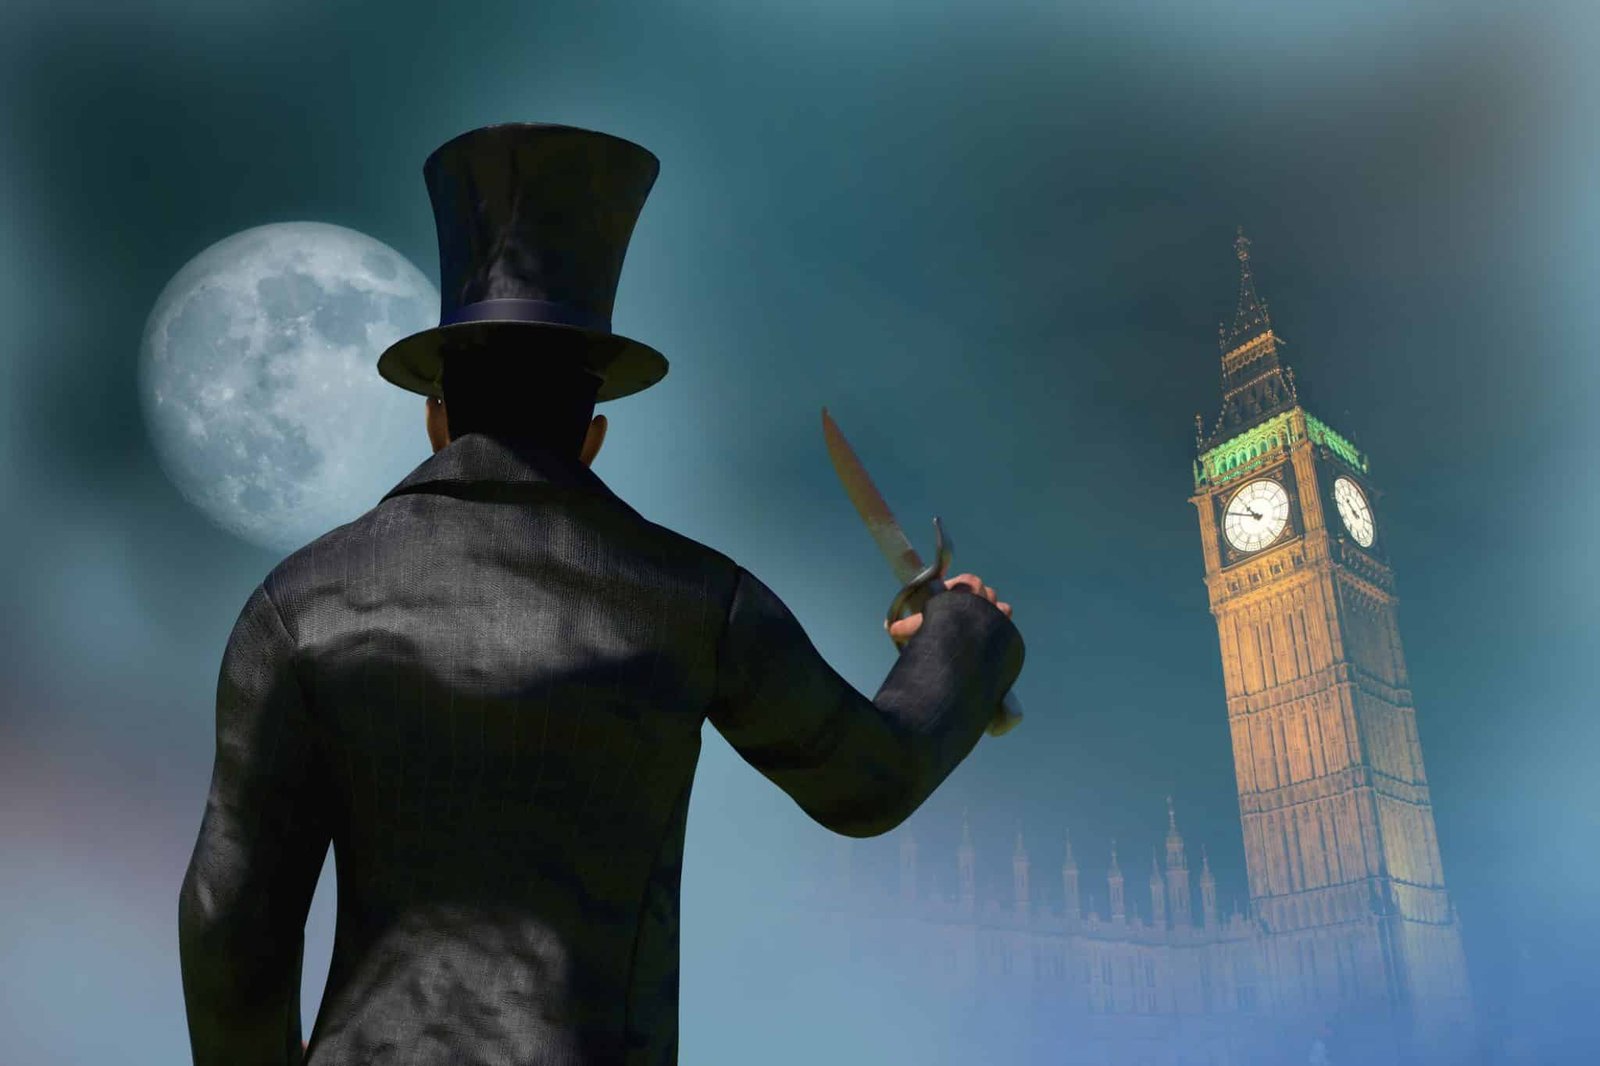 Jack the Ripper in old London